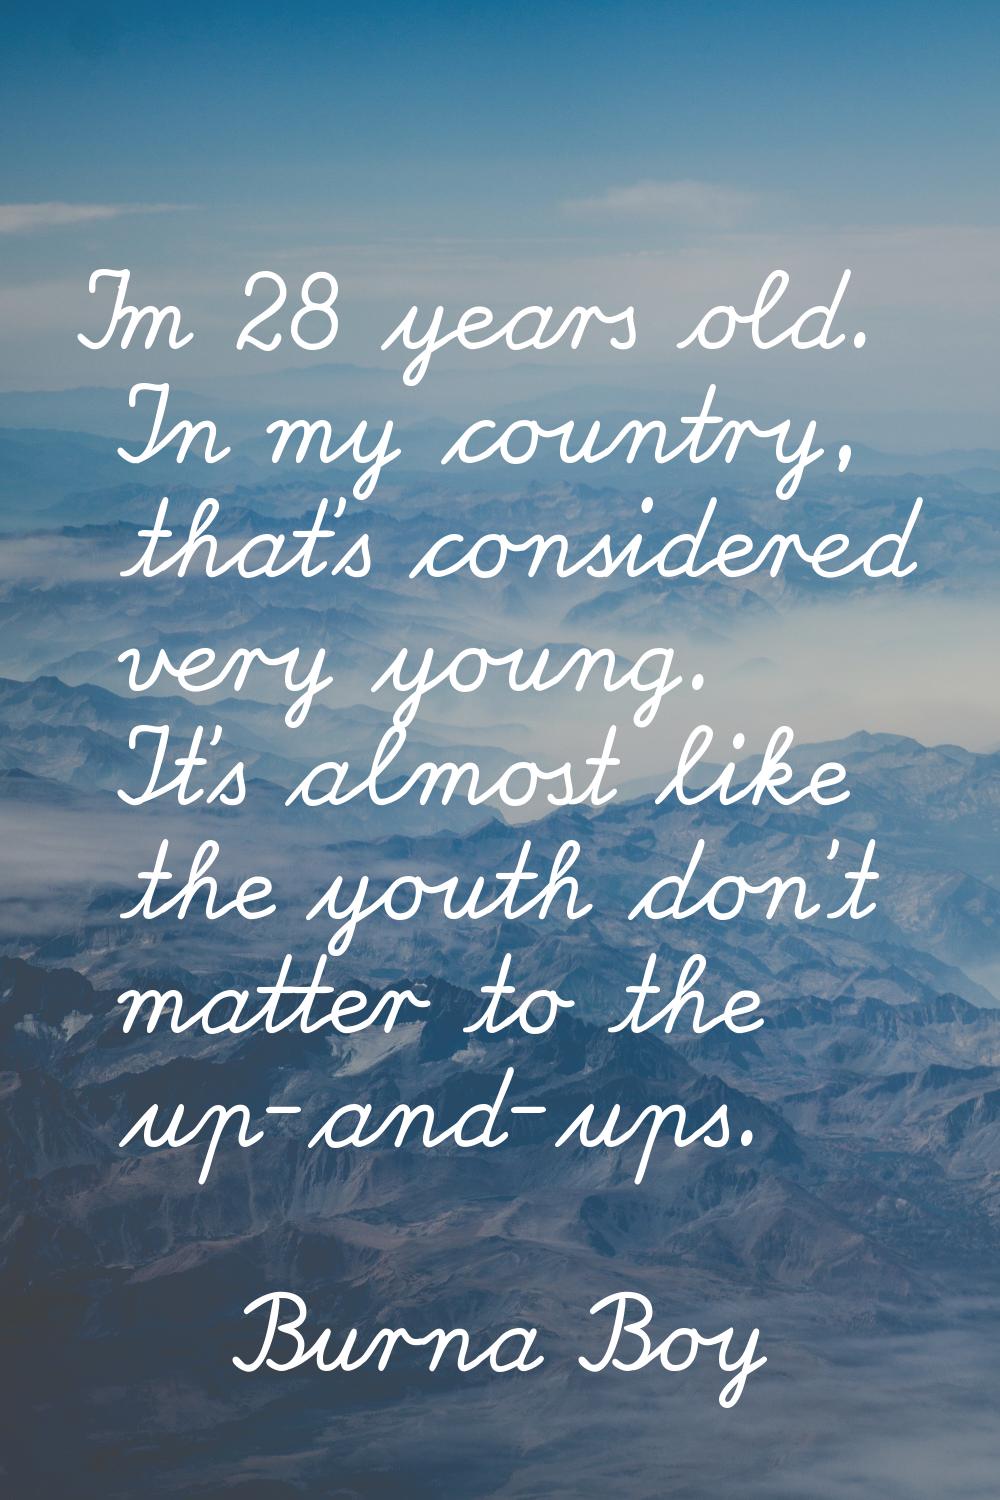 I'm 28 years old. In my country, that's considered very young. It's almost like the youth don't mat